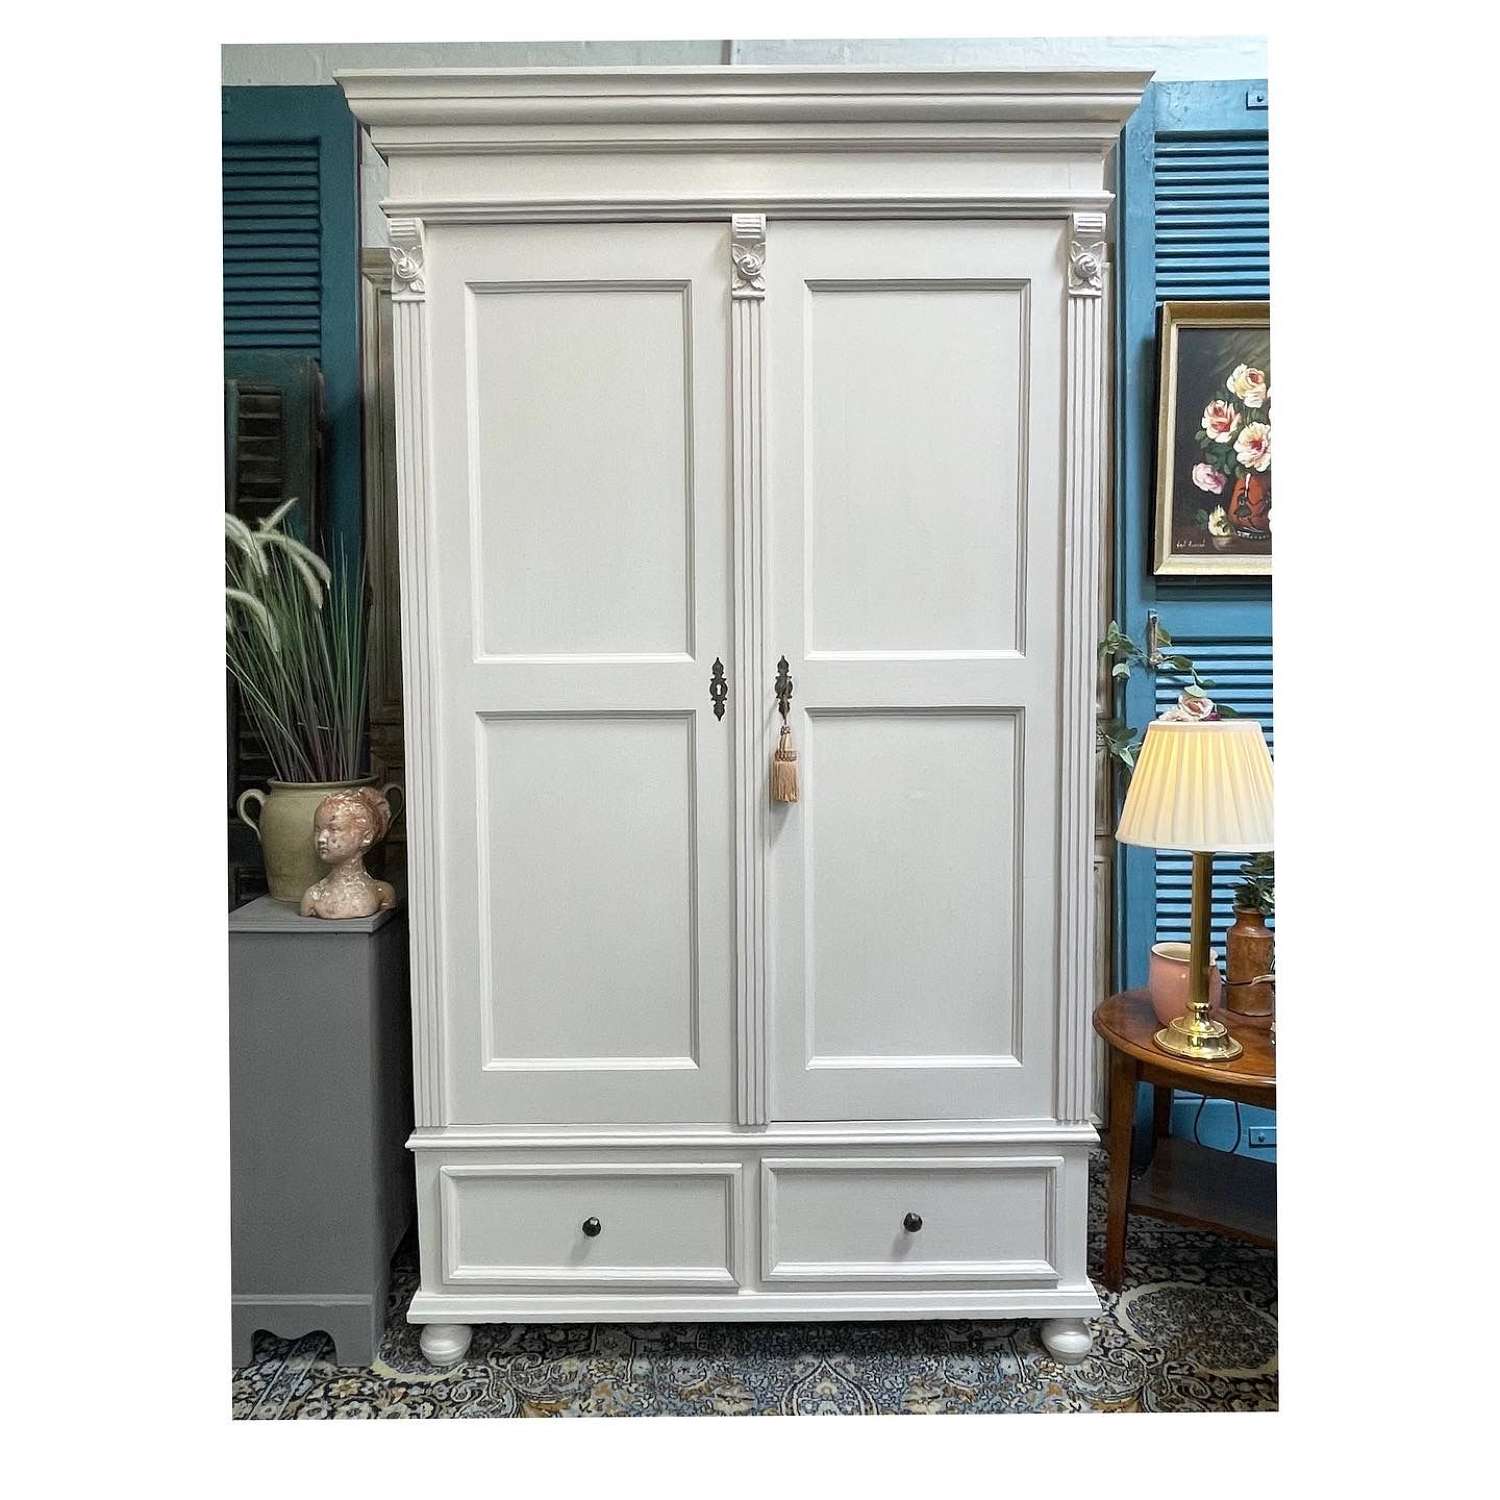 Pine Knockdown Wardrobe painted in China Clay